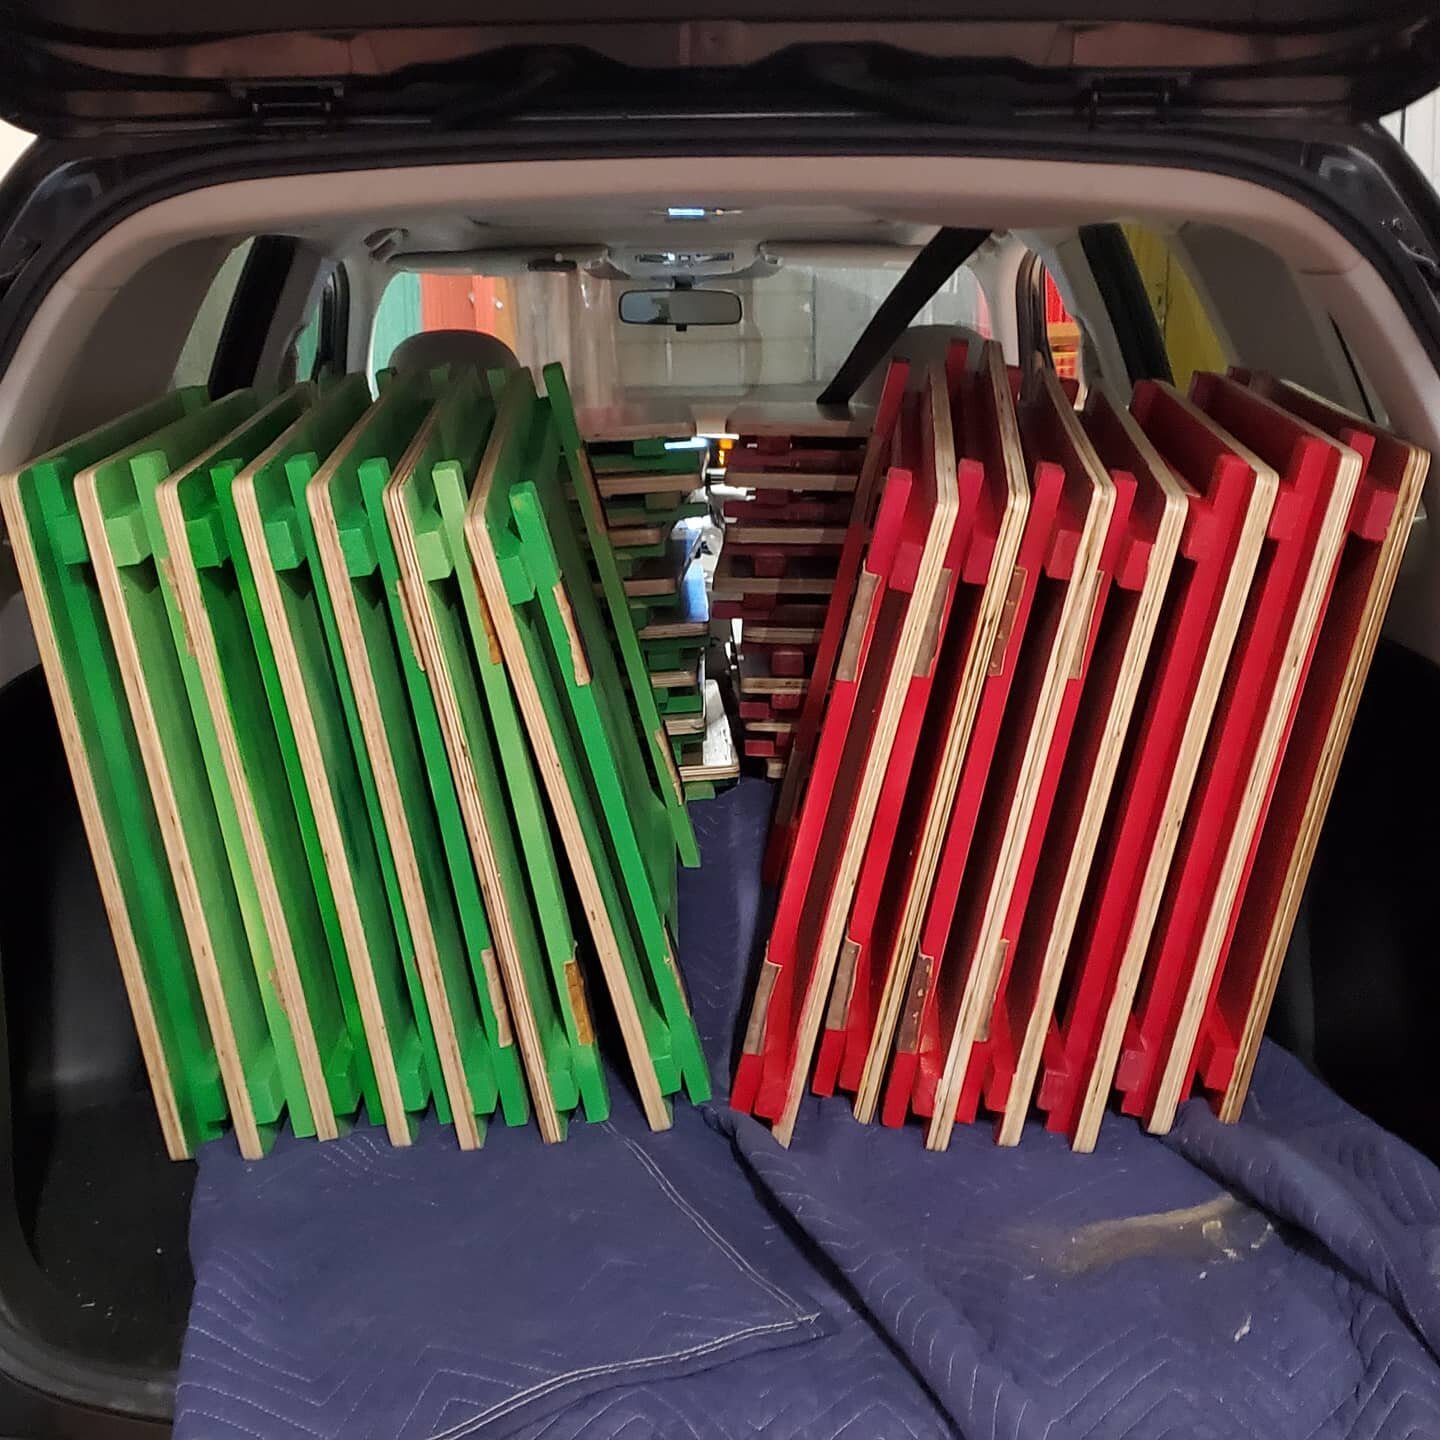 speaking of size I was able to fit 30 2x2s in an SUV if u like that kind of stuff